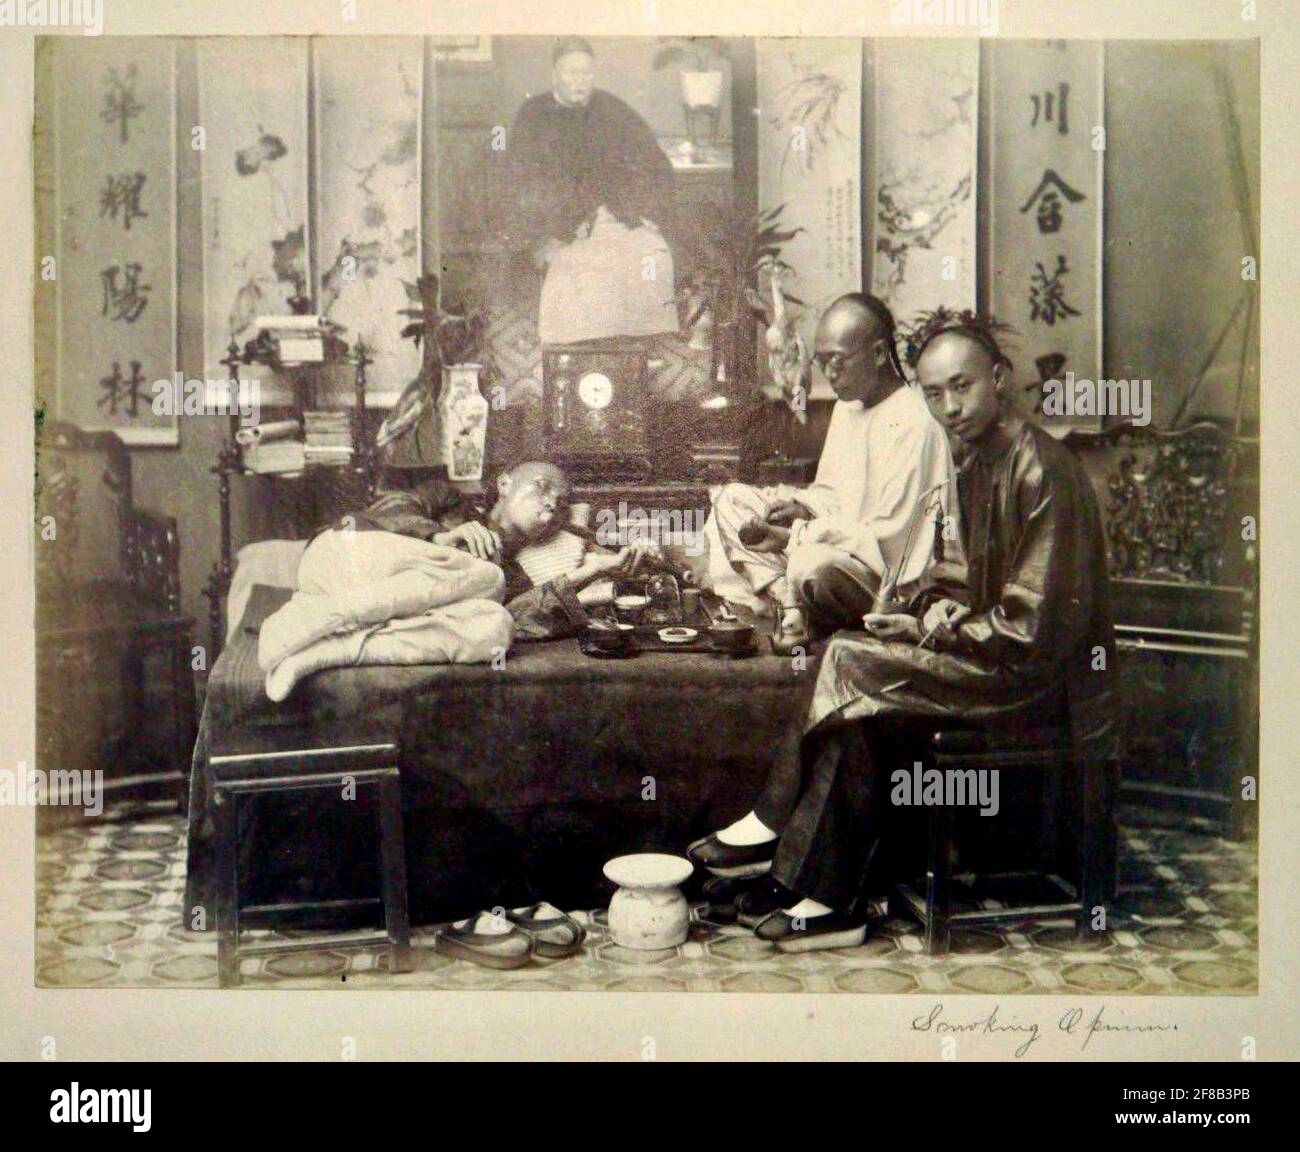 Lai Afong vintage photograph from circa 1880 entitled Smoking Opium. Stock Photo